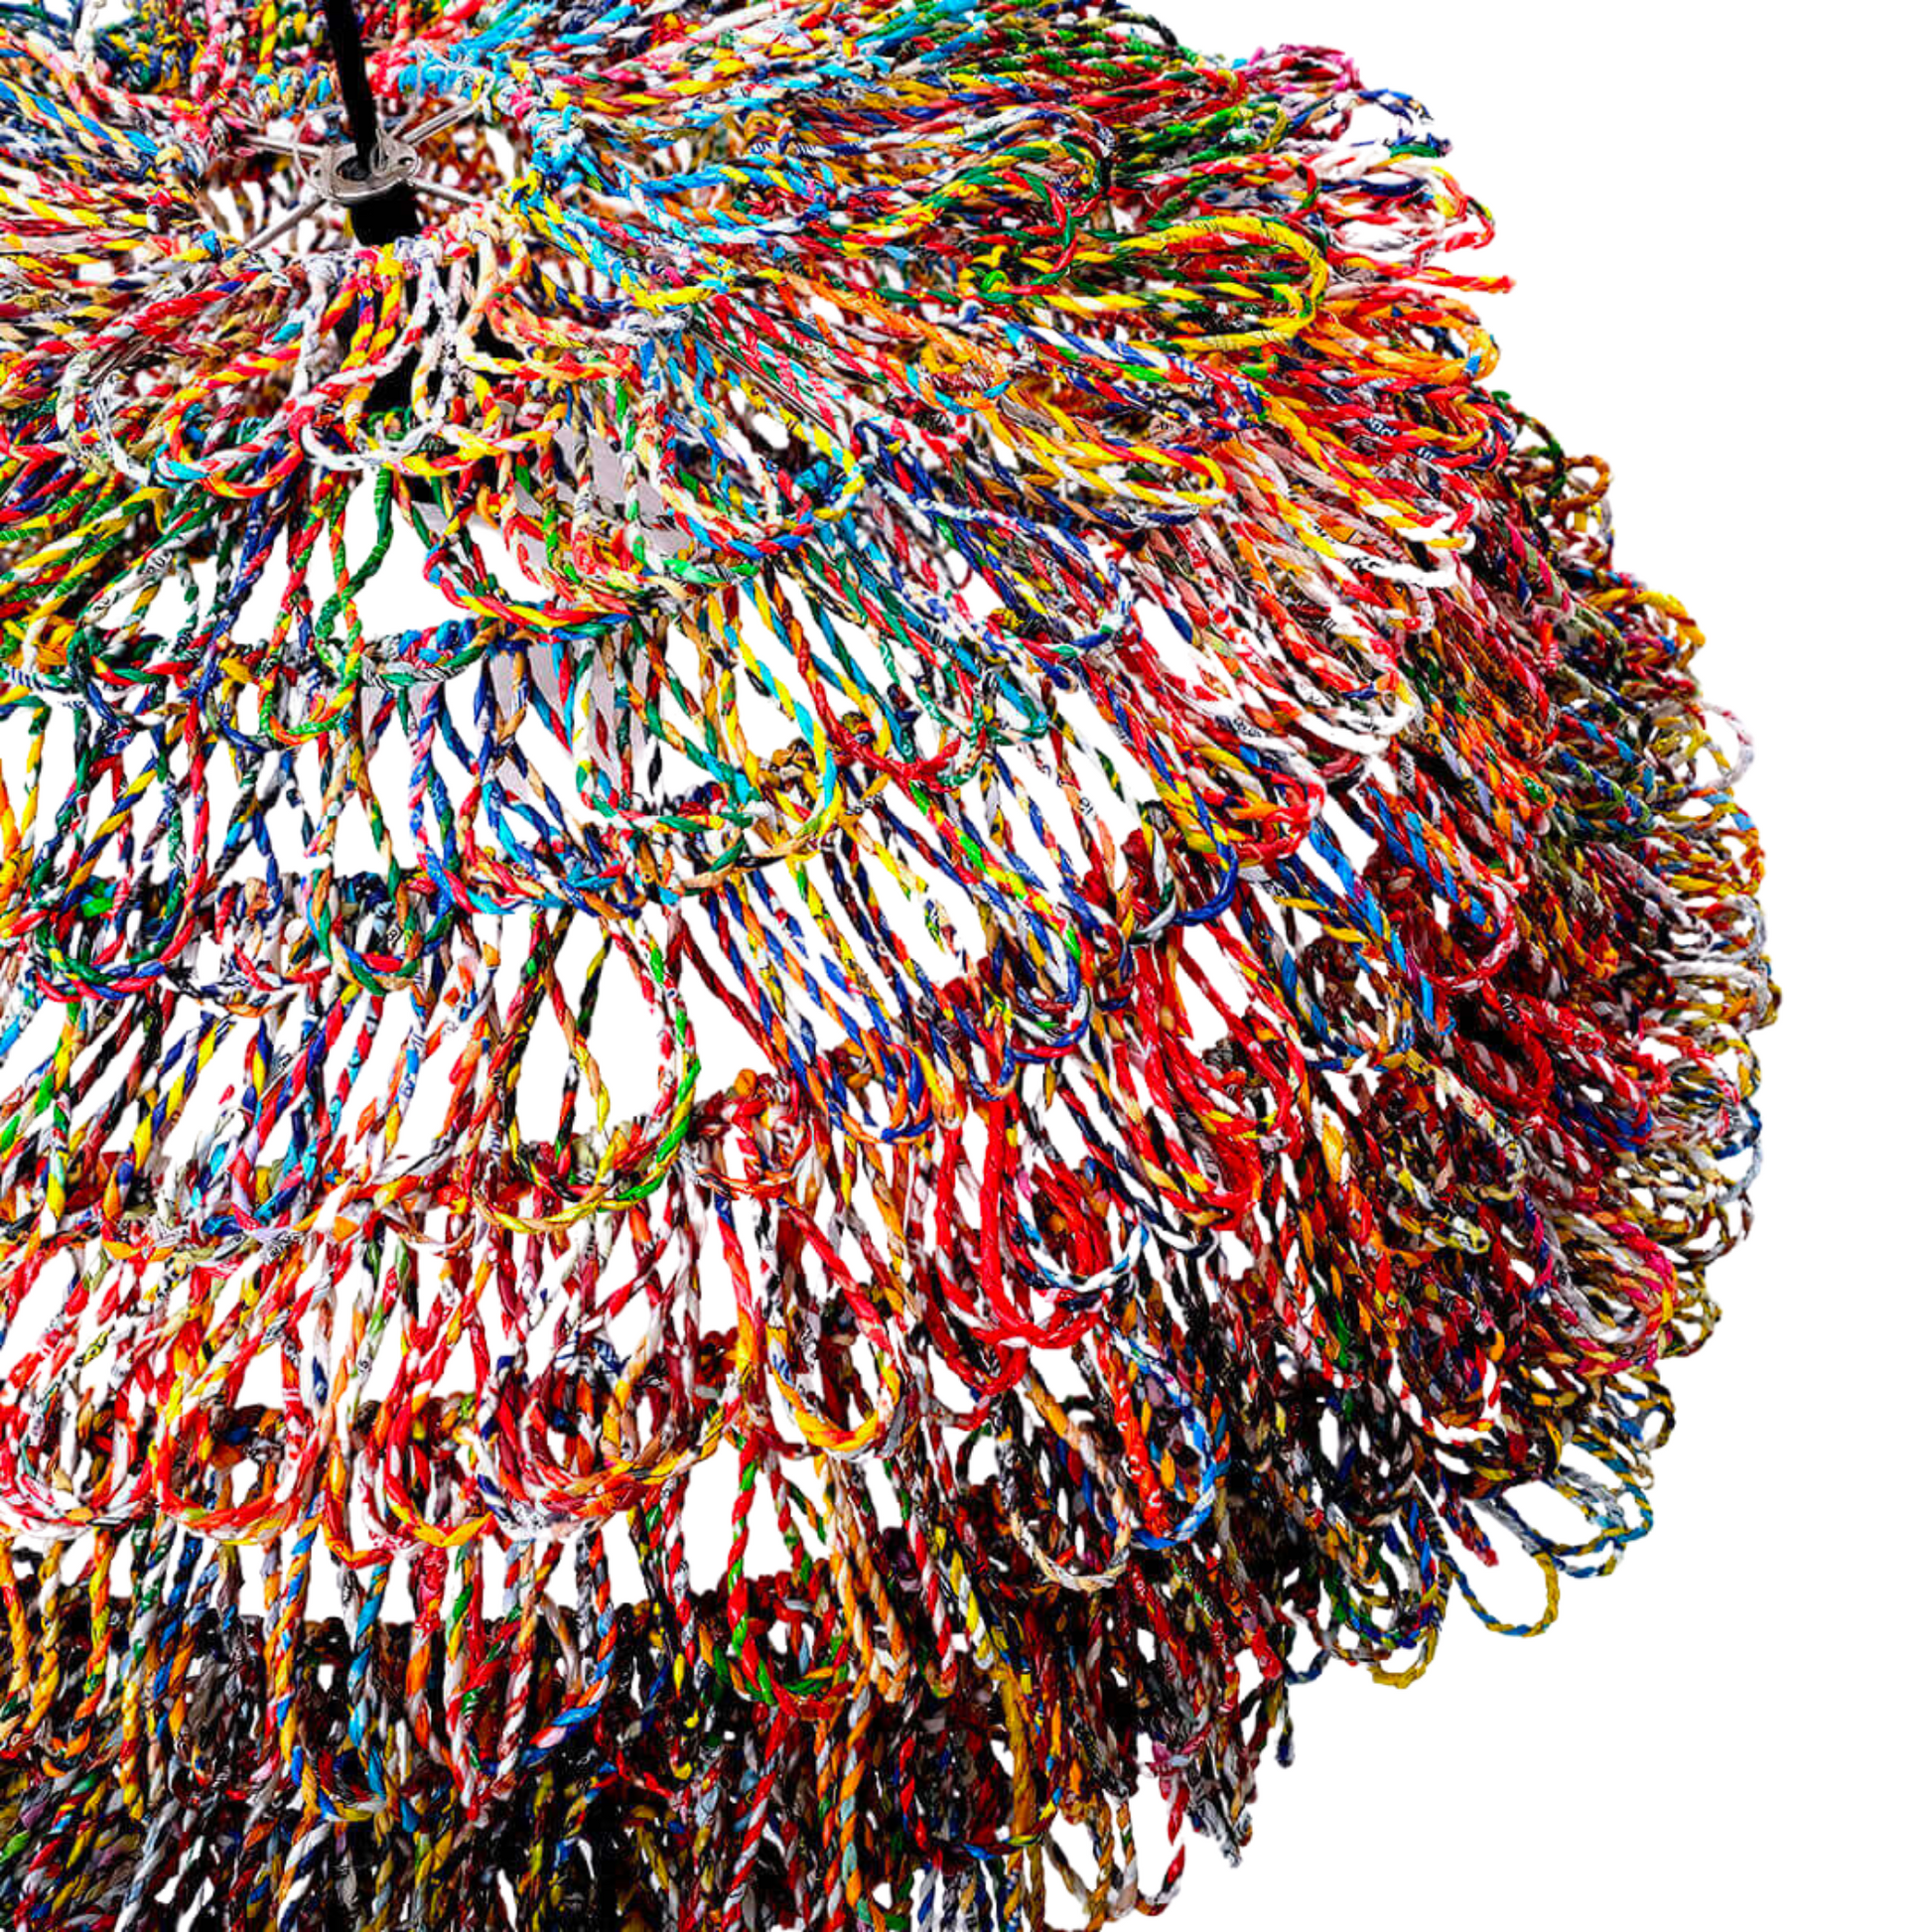 Roped Woven Recycled Plastic